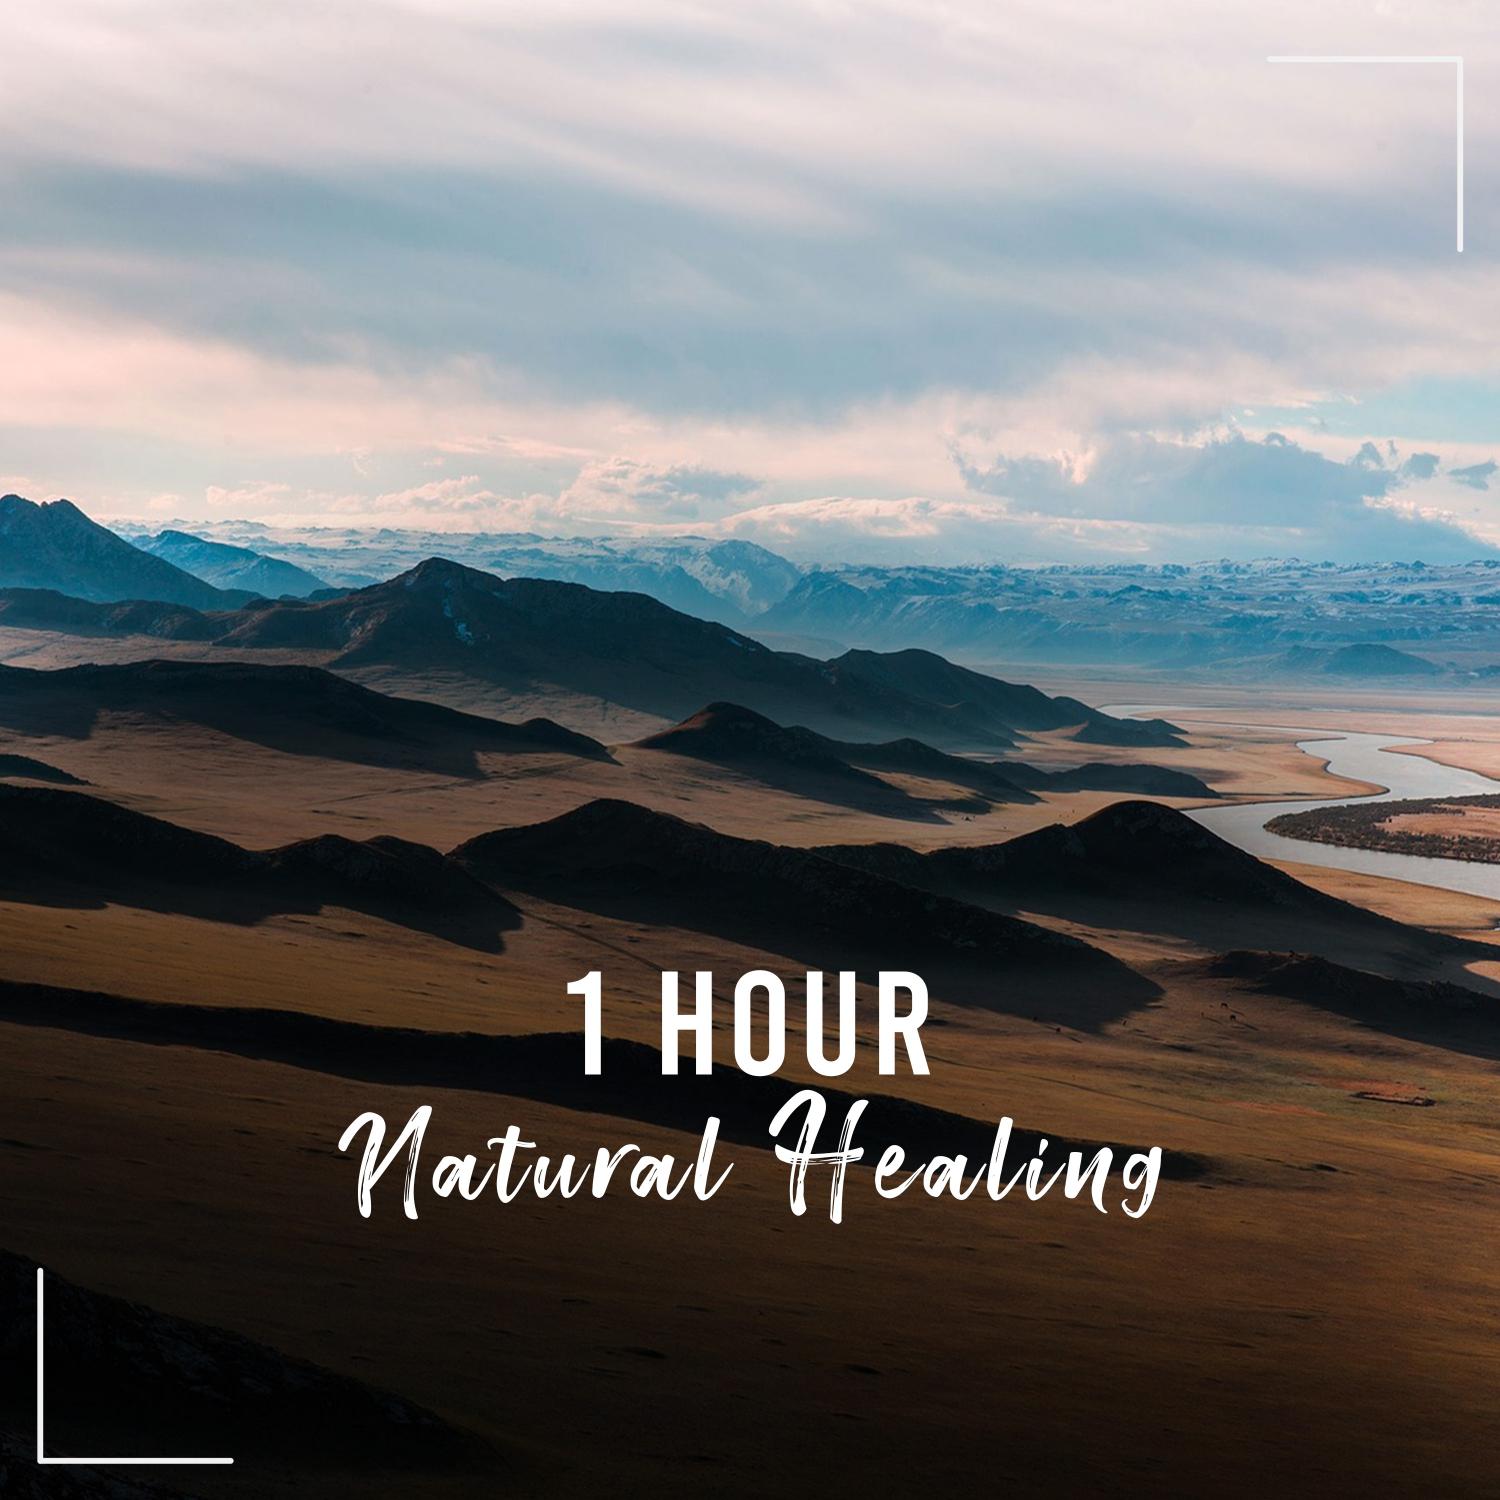 1 Hour Natural Healing Sounds for Practicing Calm